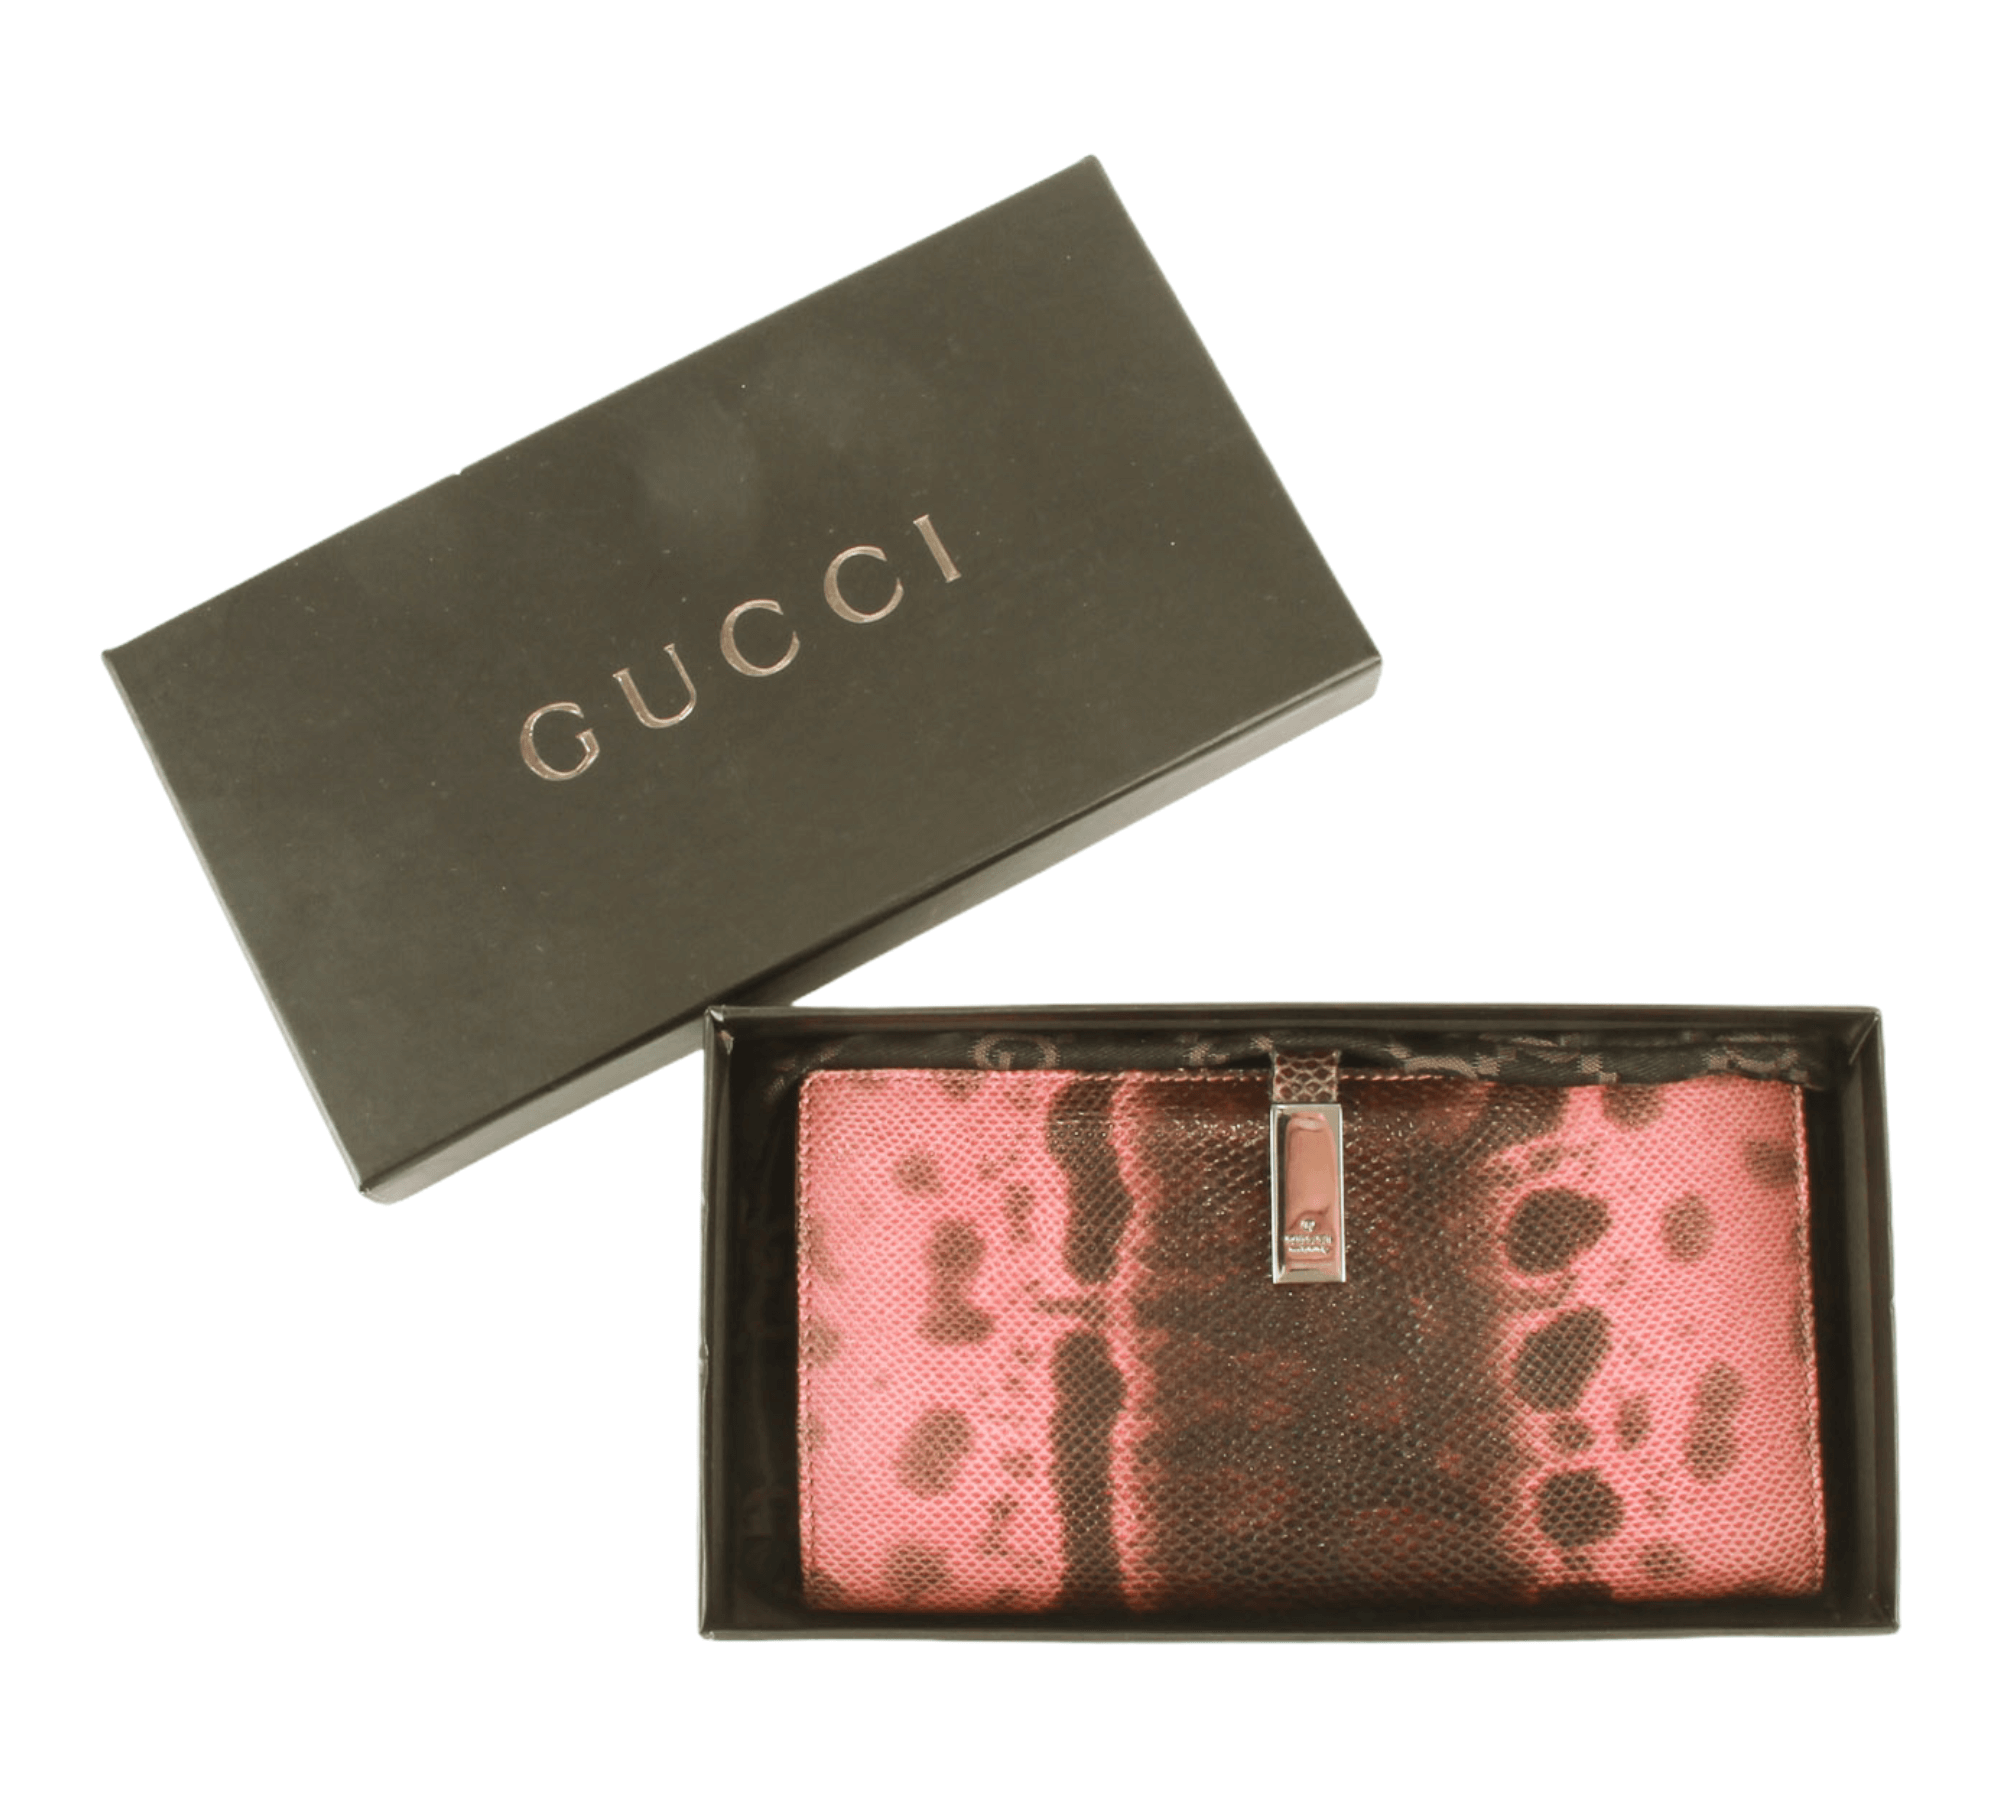 Authentic Gucci limited snake leather long wallet